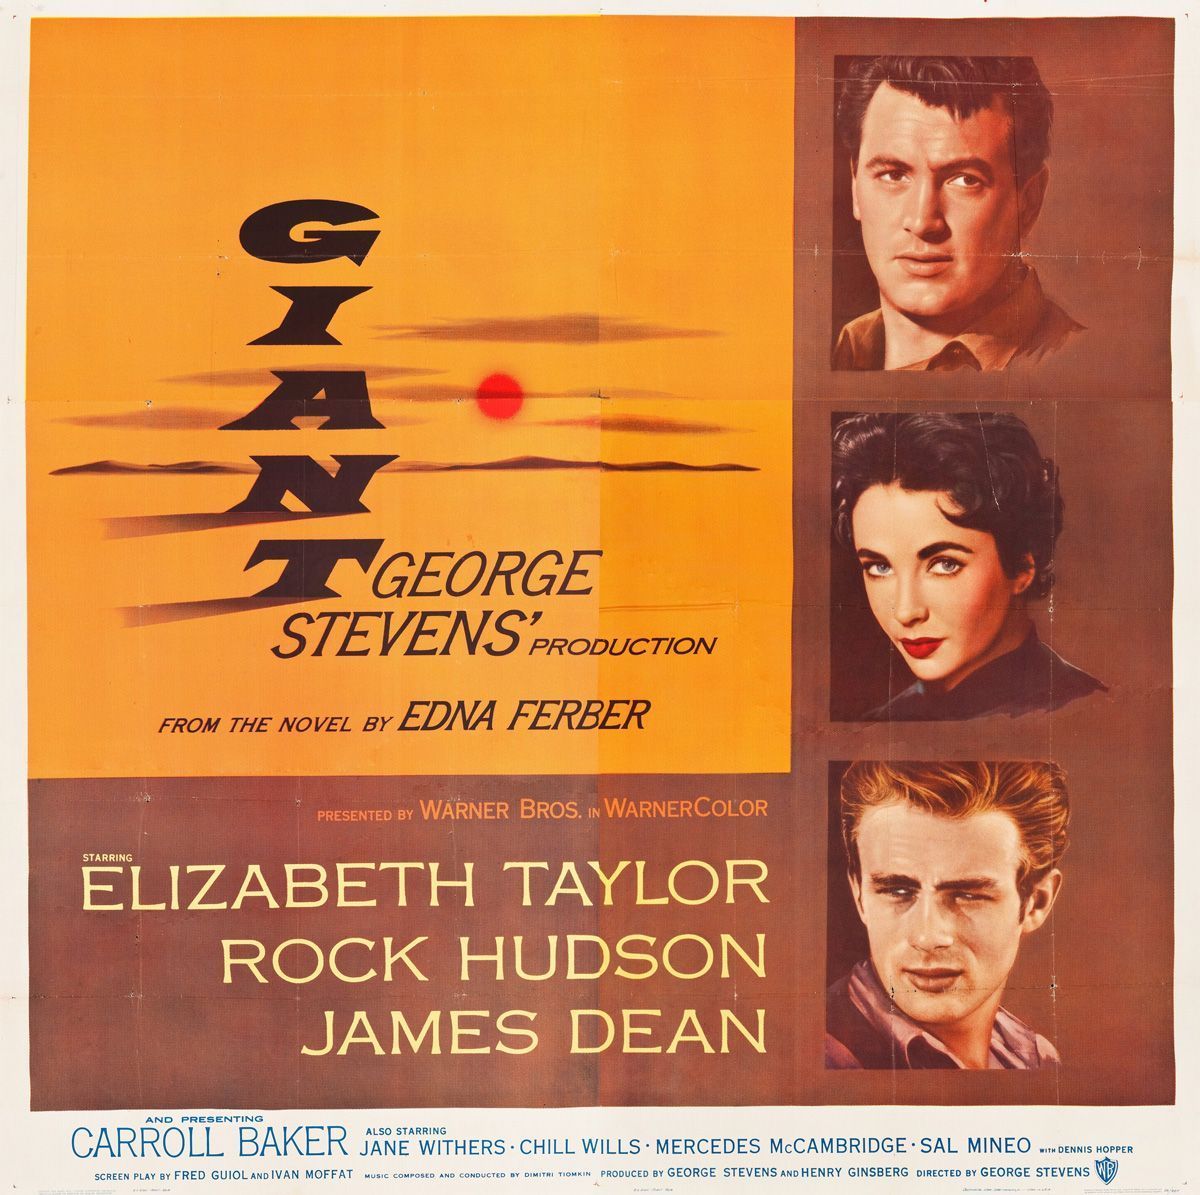 JUST ADDED! Elizabeth Taylor, Rock Hudson & James Dean star in George Stevens' epic GIANT (1956), screening in vibrant I.B. Technicolor 35mm next weekend, Friday, Saturday & Sunday, May 24th - 26th. Tickets available at the theater and online: buff.ly/3xZcstn